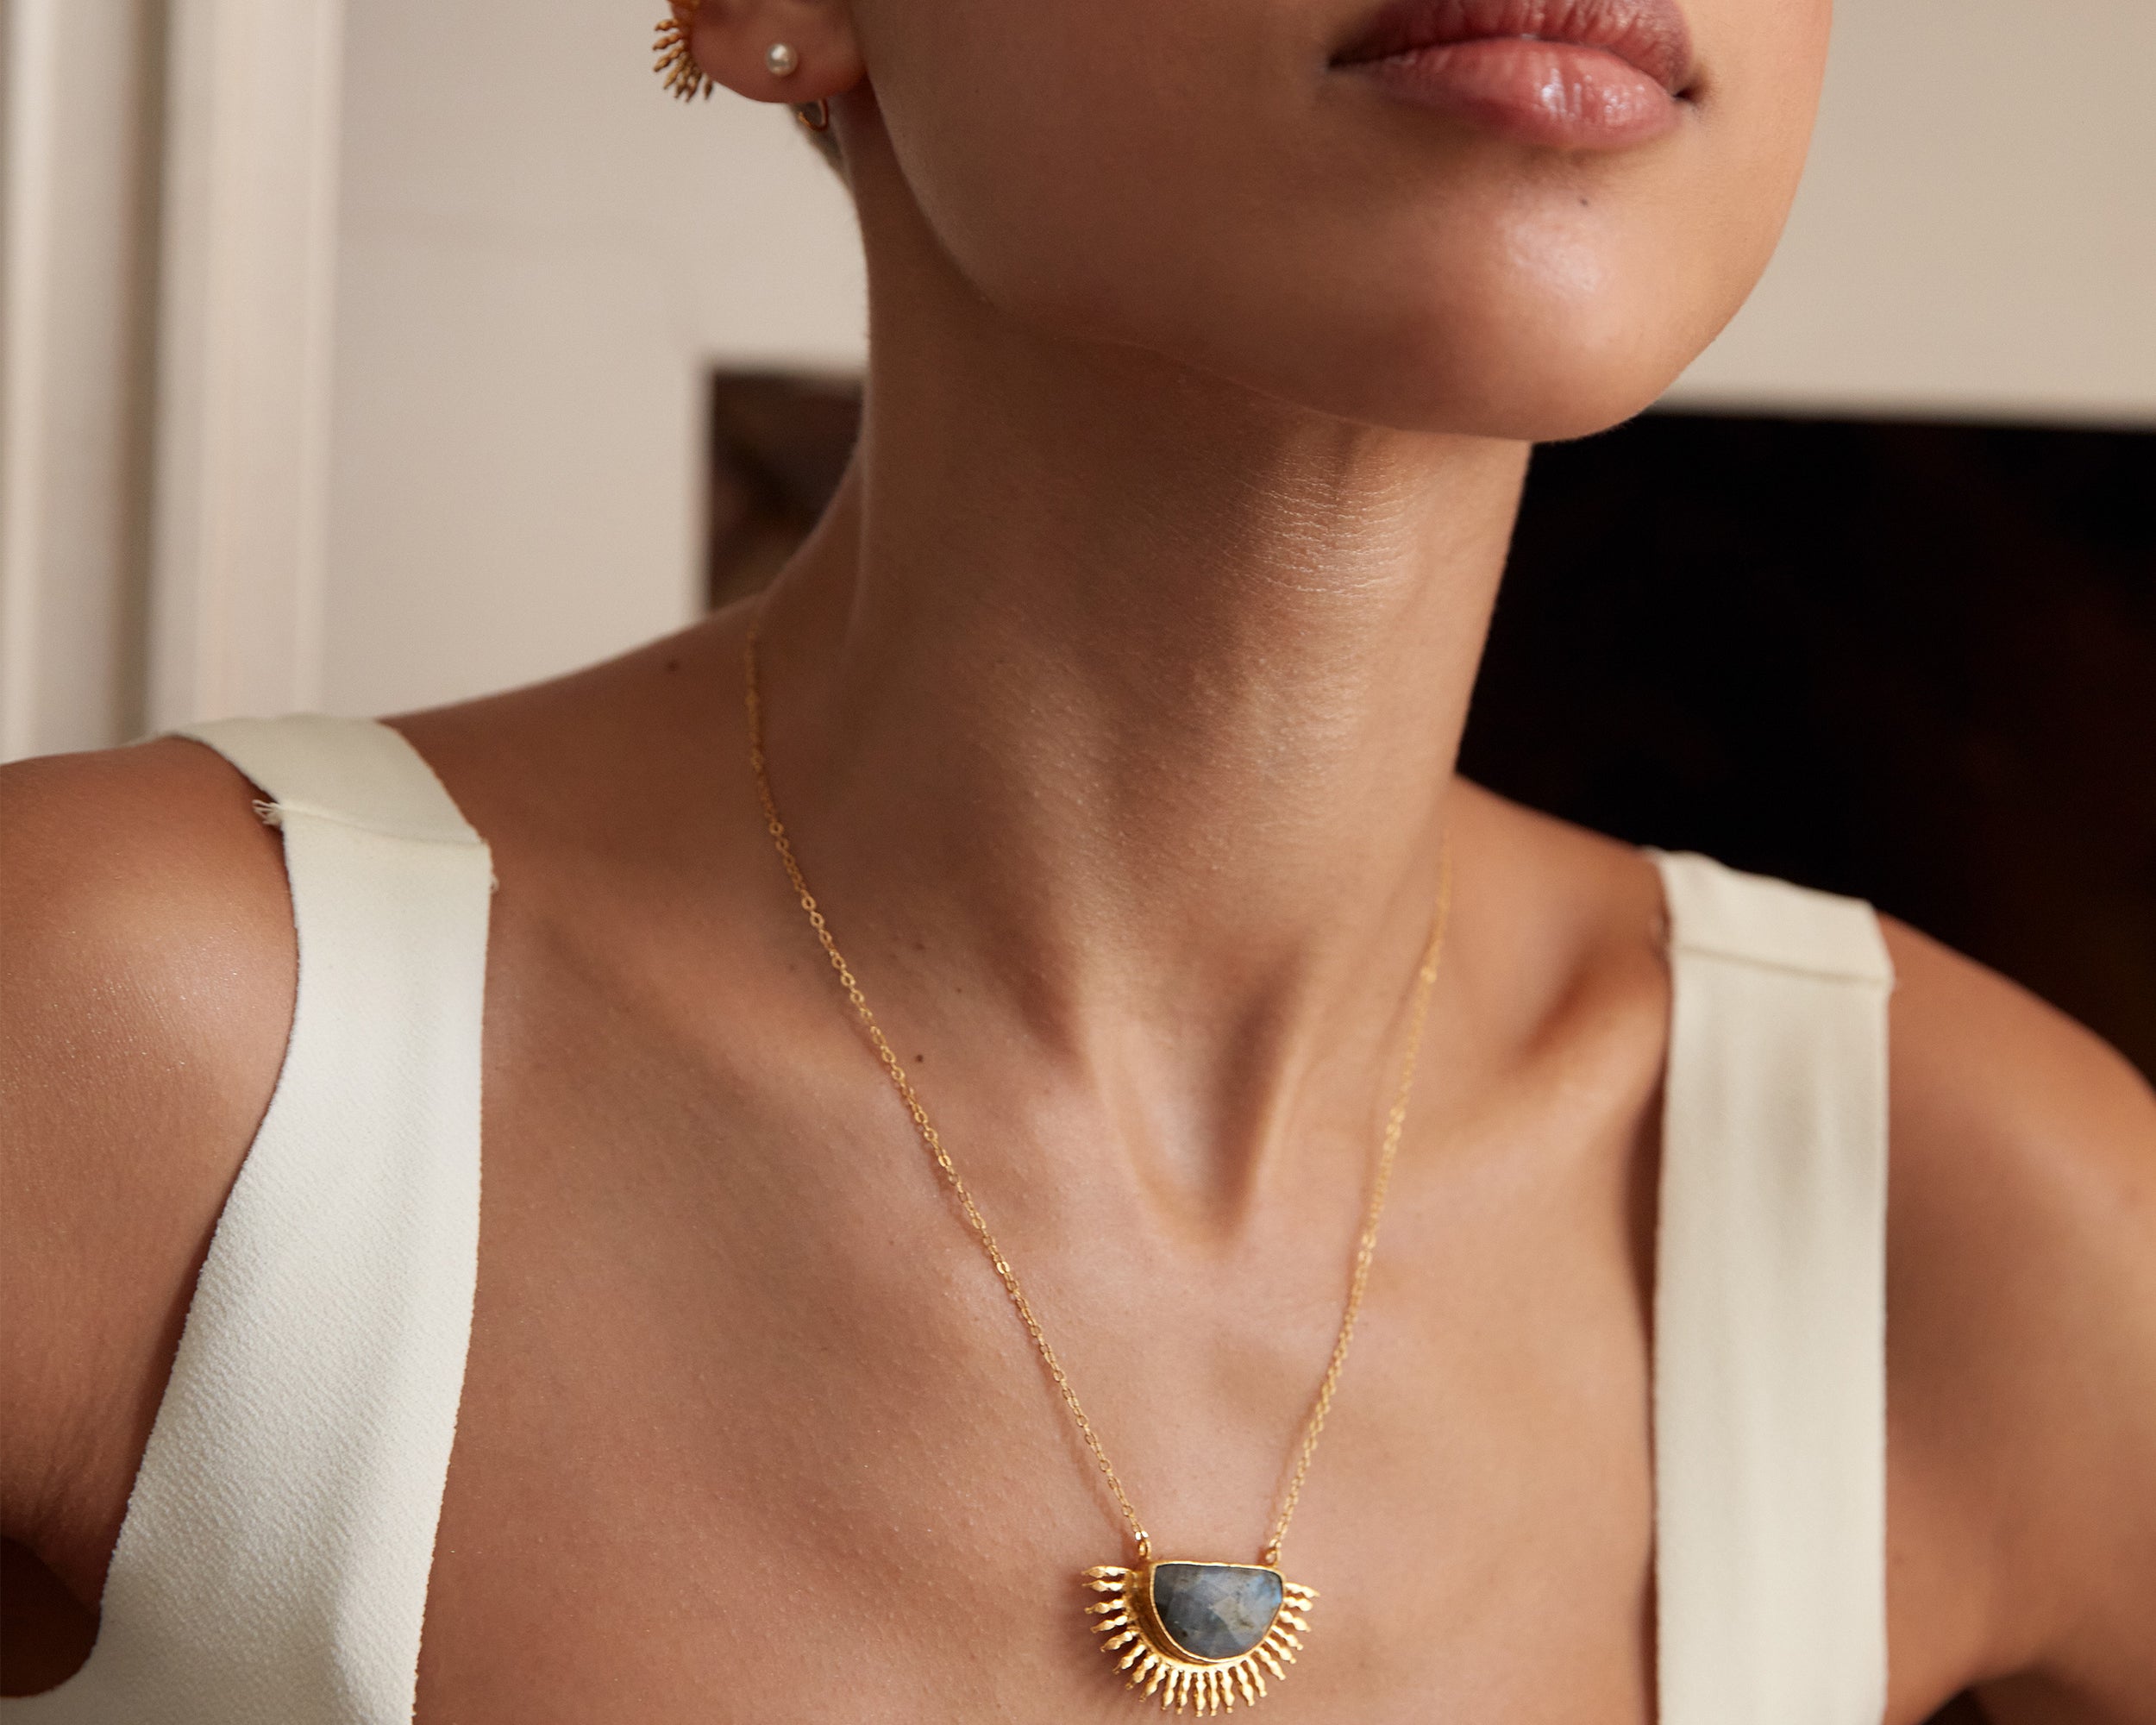 Sunrise Labradorite Pendant Necklace | Sustainable Jewellery by Ottoman Hands